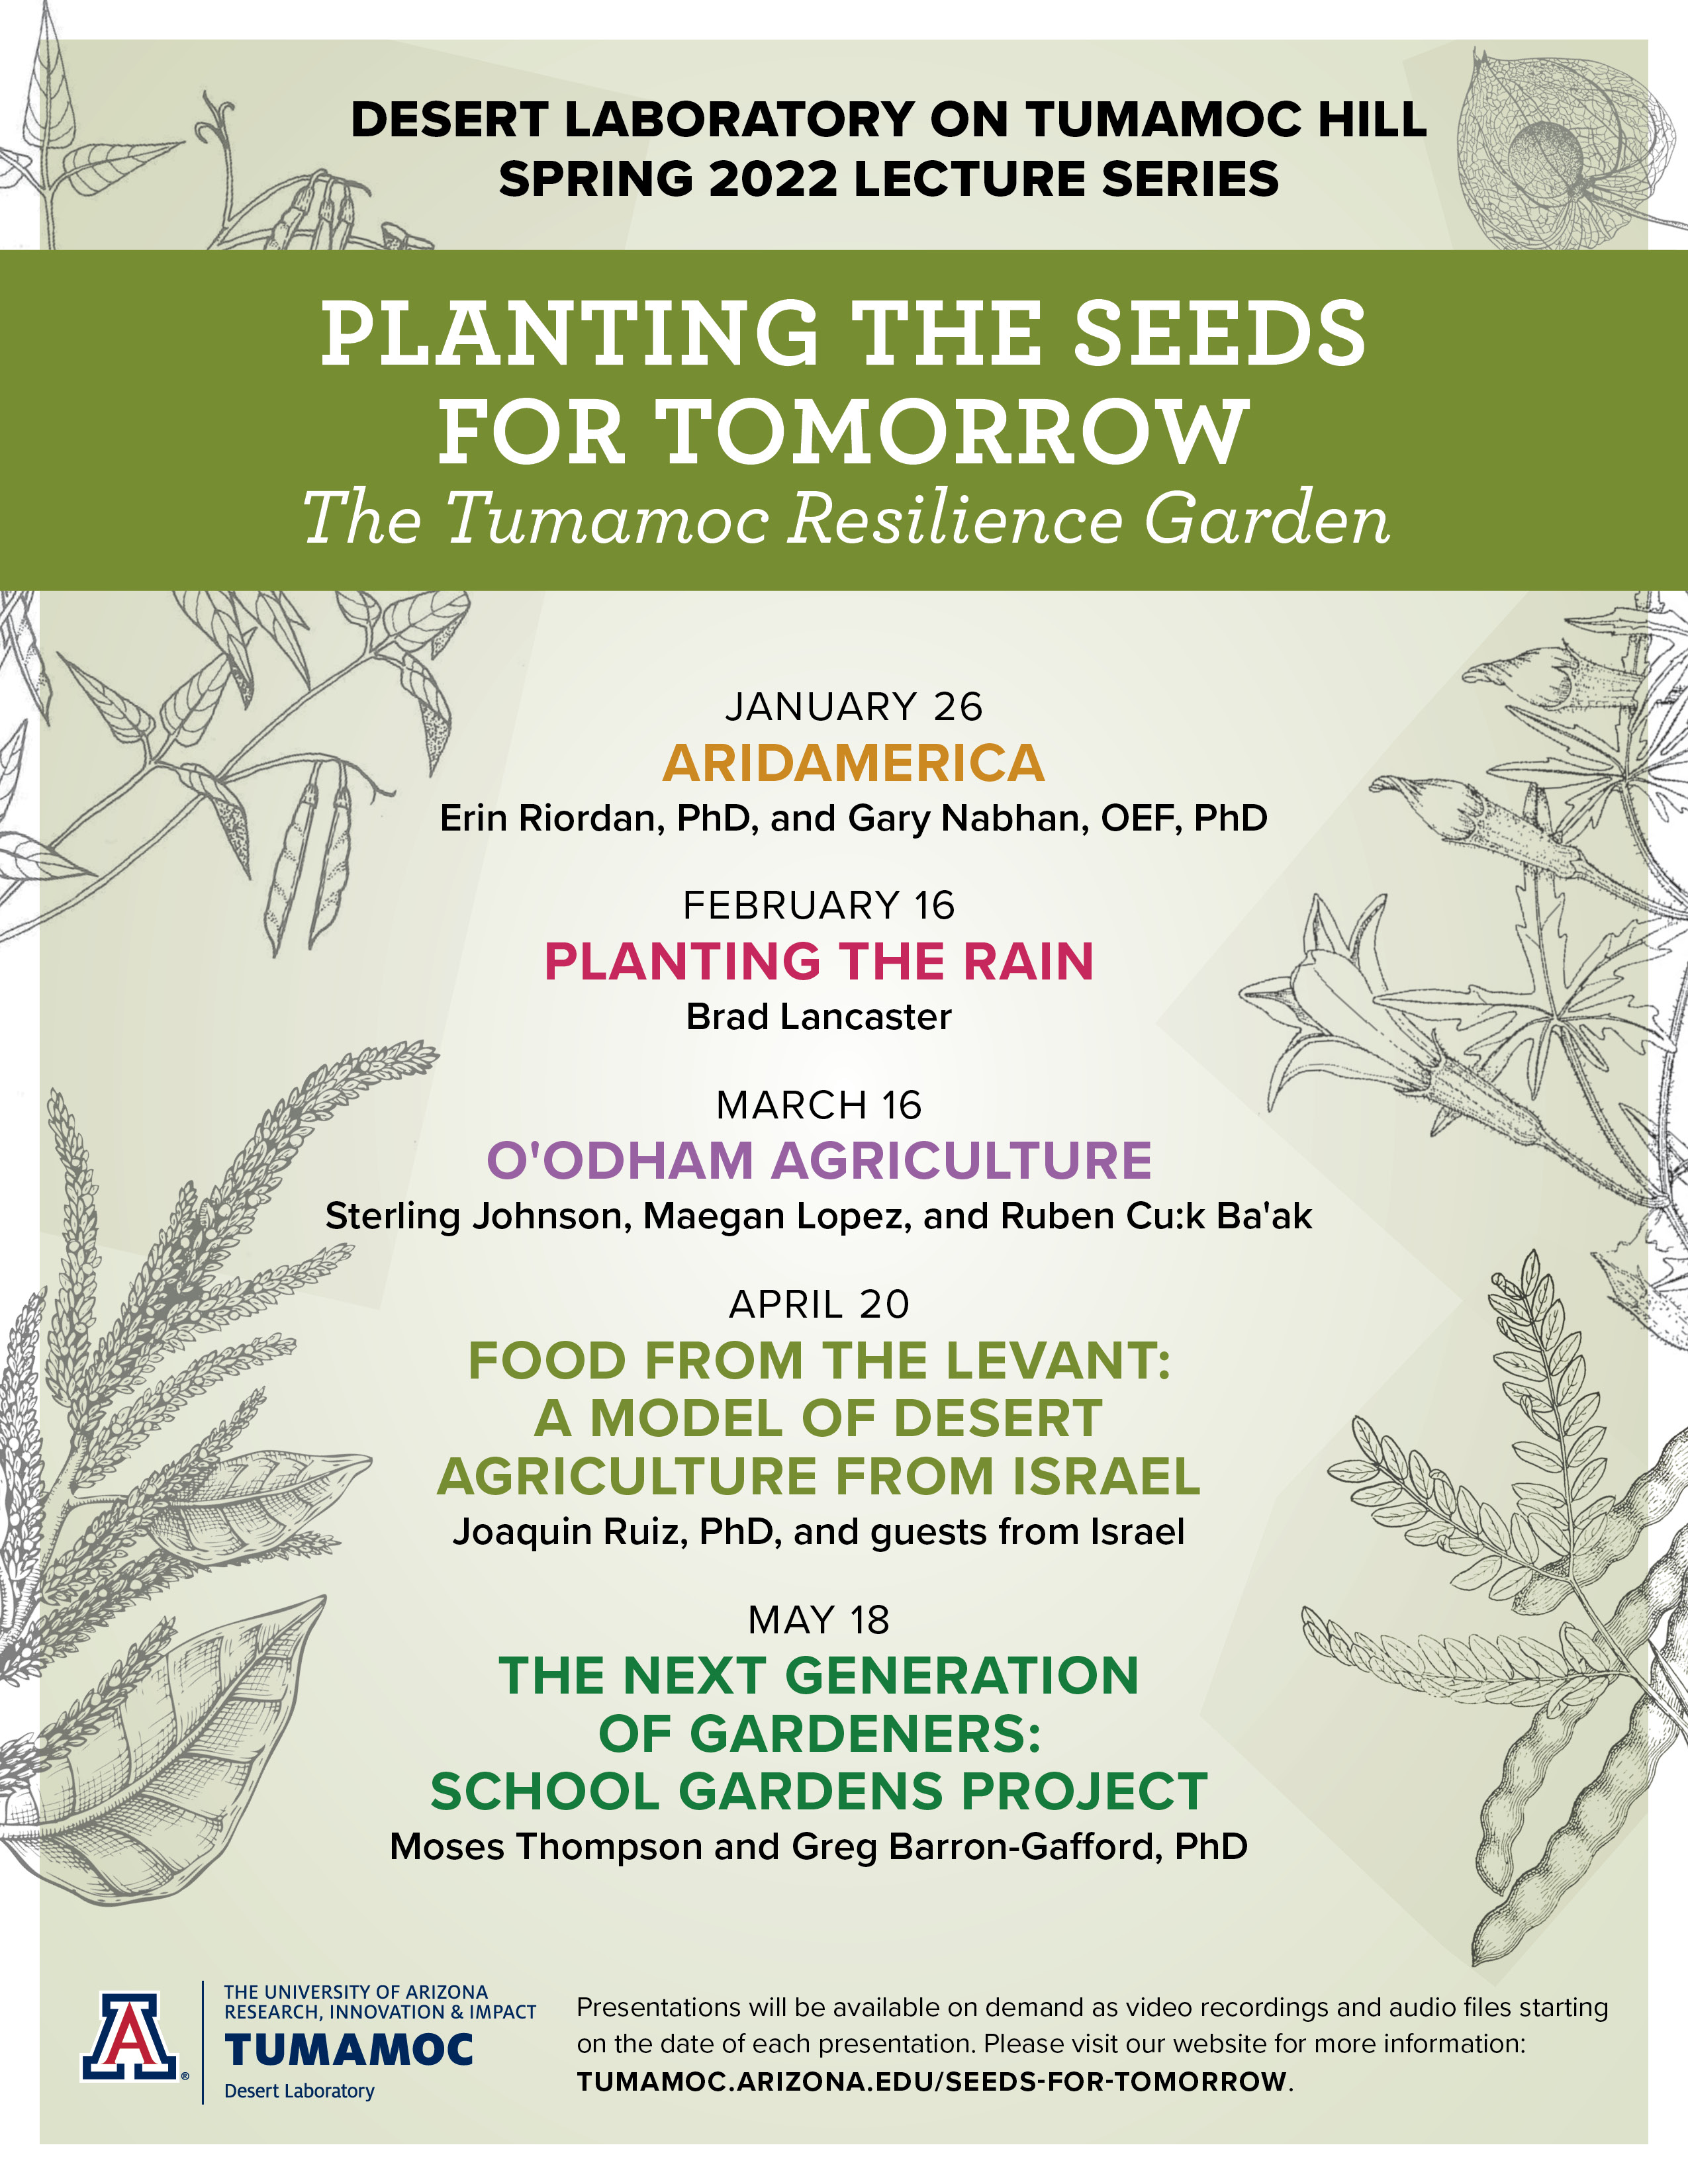 Flyer for Planting the Seeds for Tomorrow lecture series.